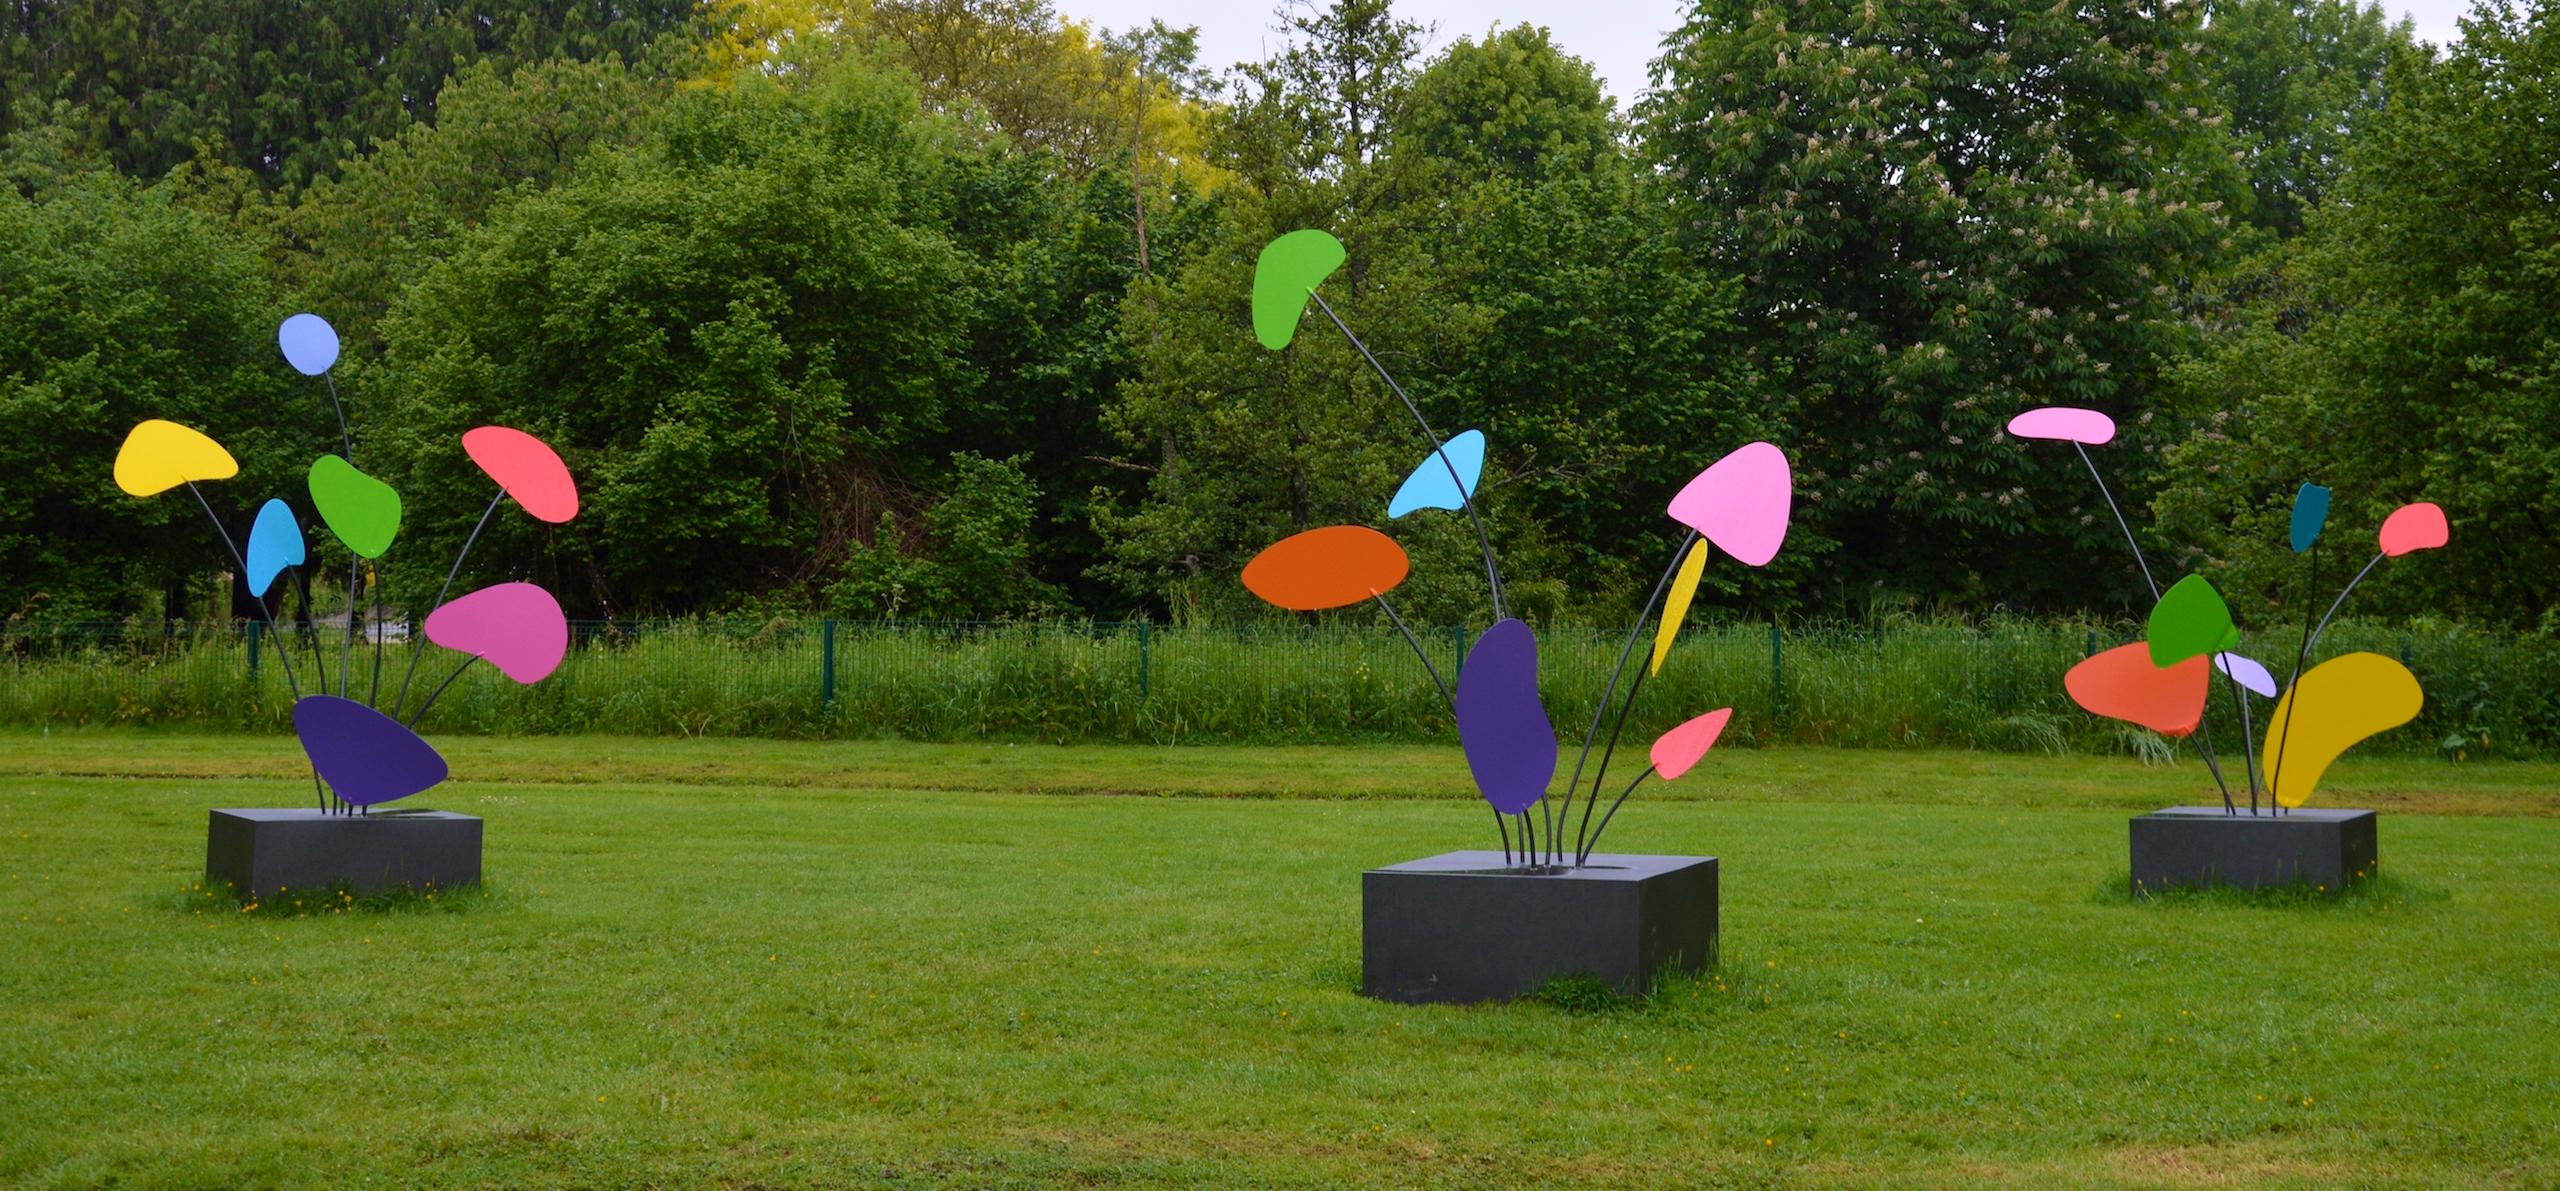 Stabile by Franck K - Painted stainless steel sculpture, outdoor, colourful For Sale 3